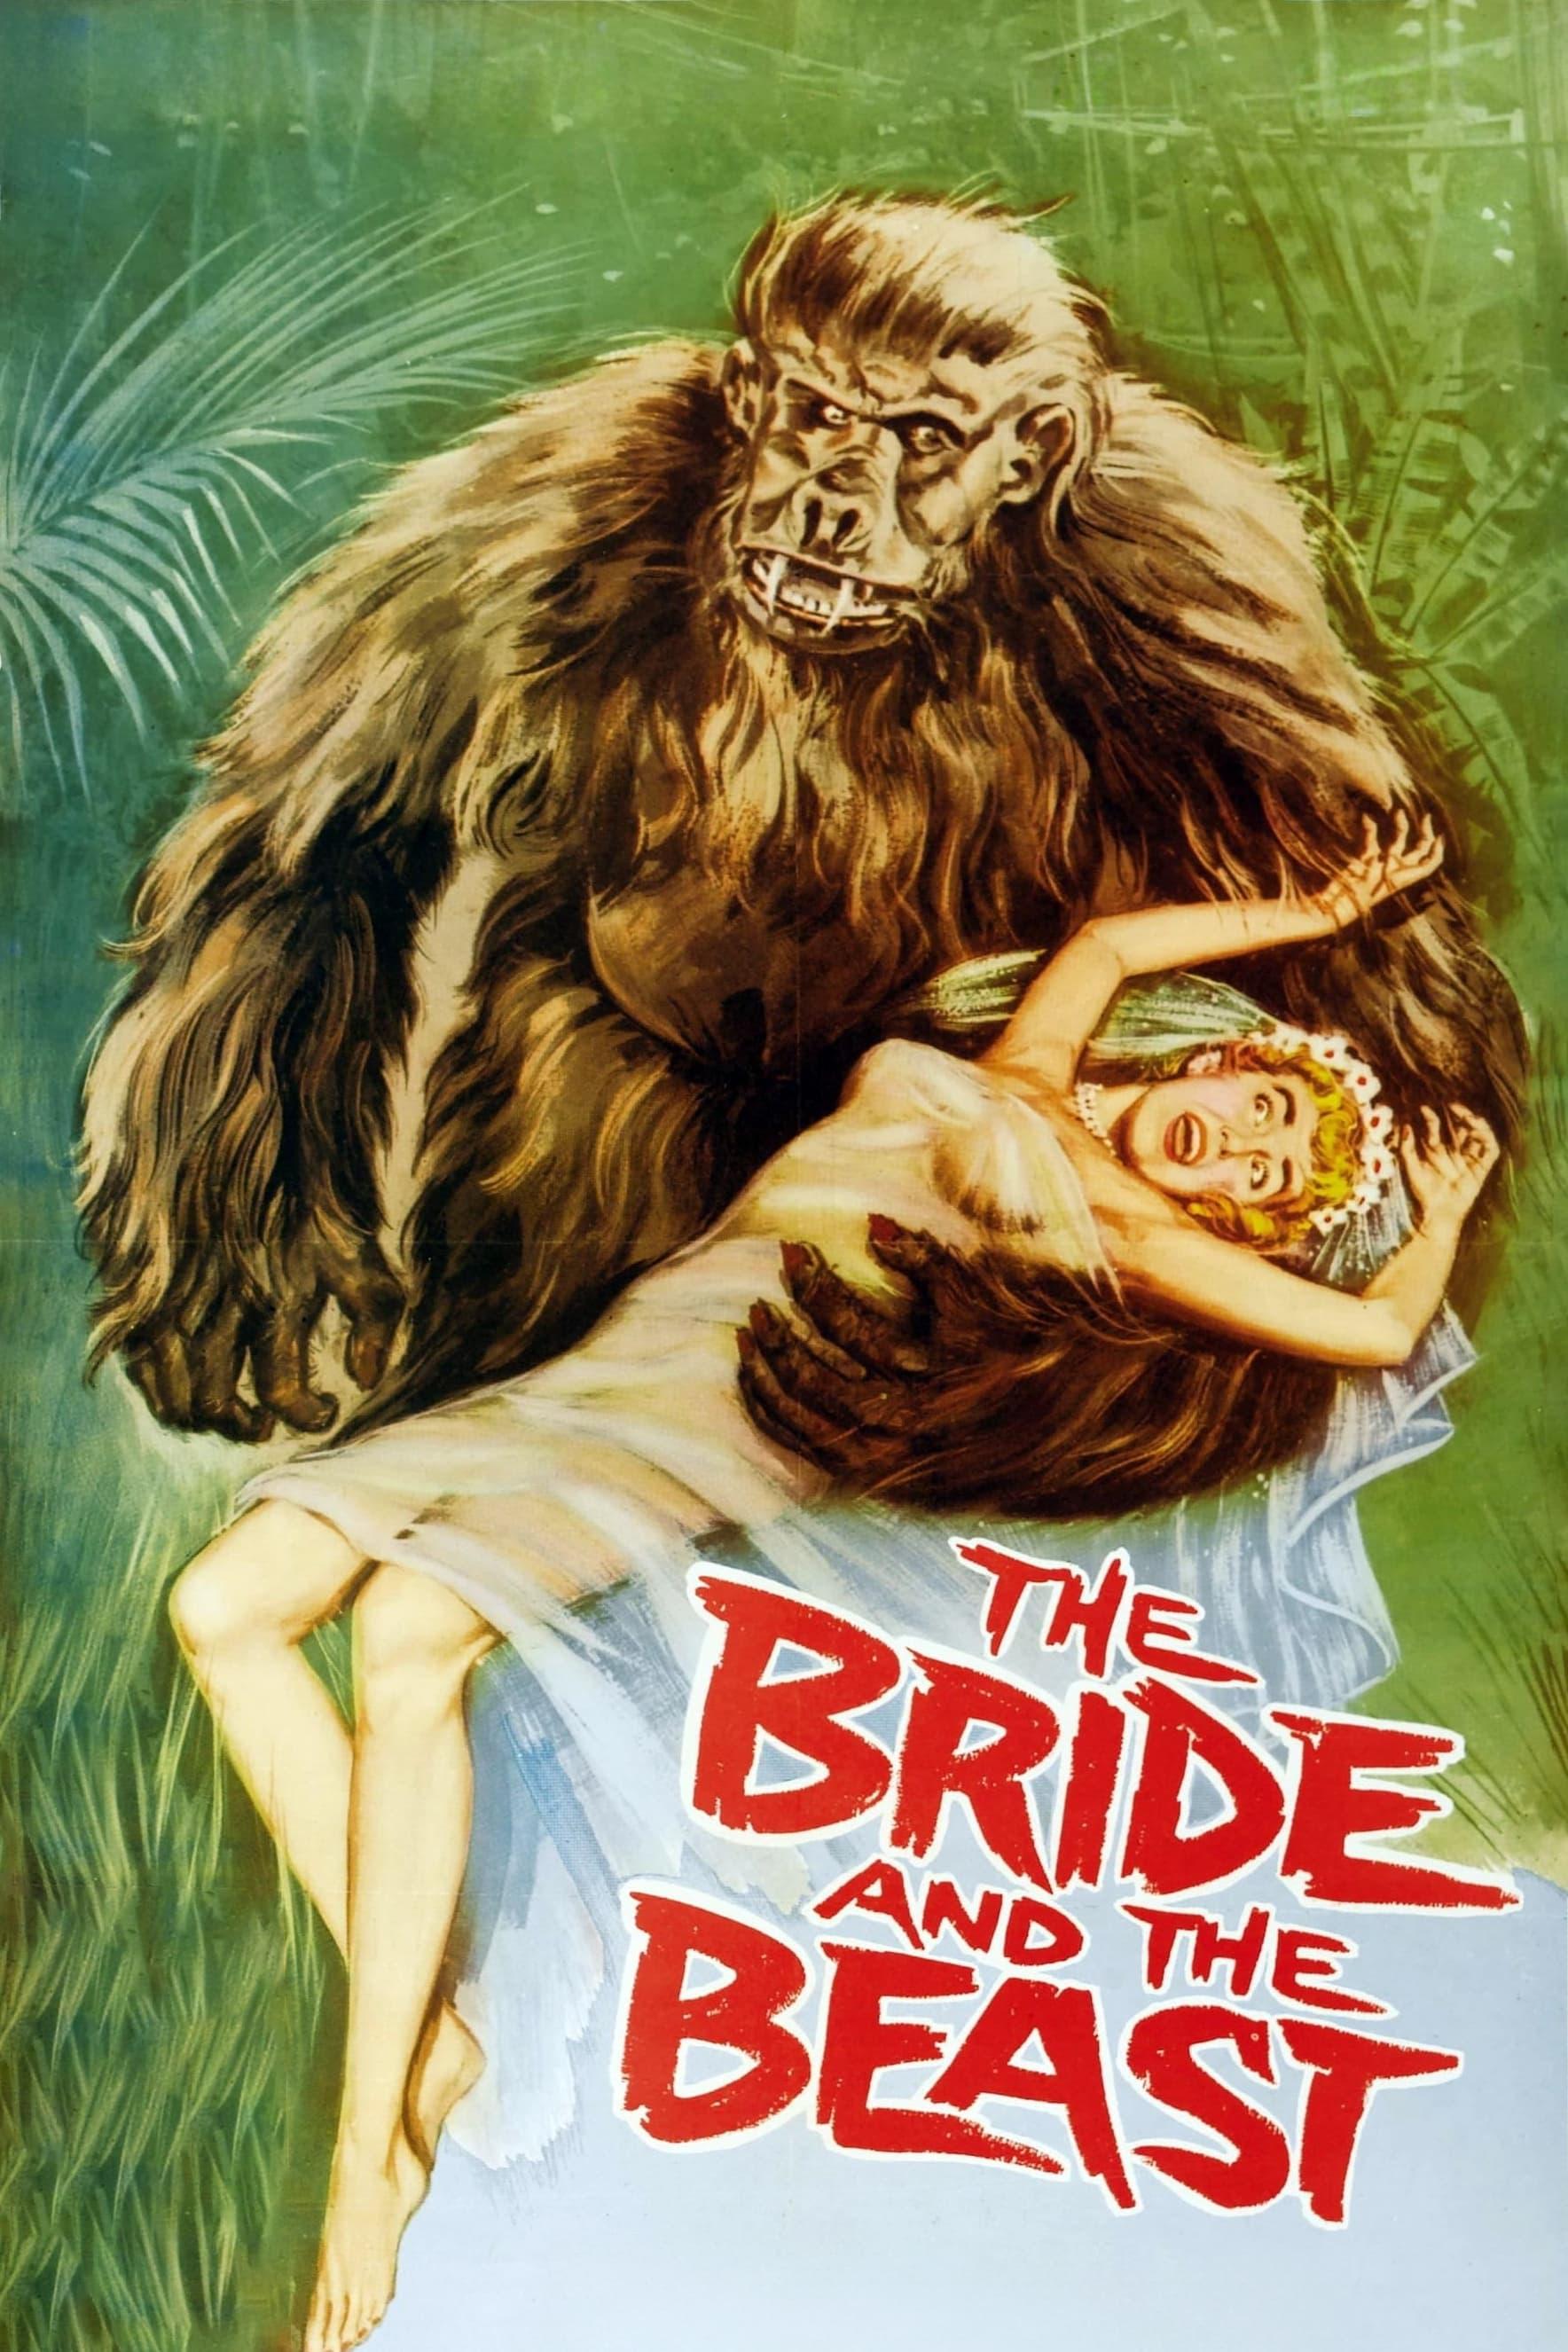 The Bride and the Beast poster